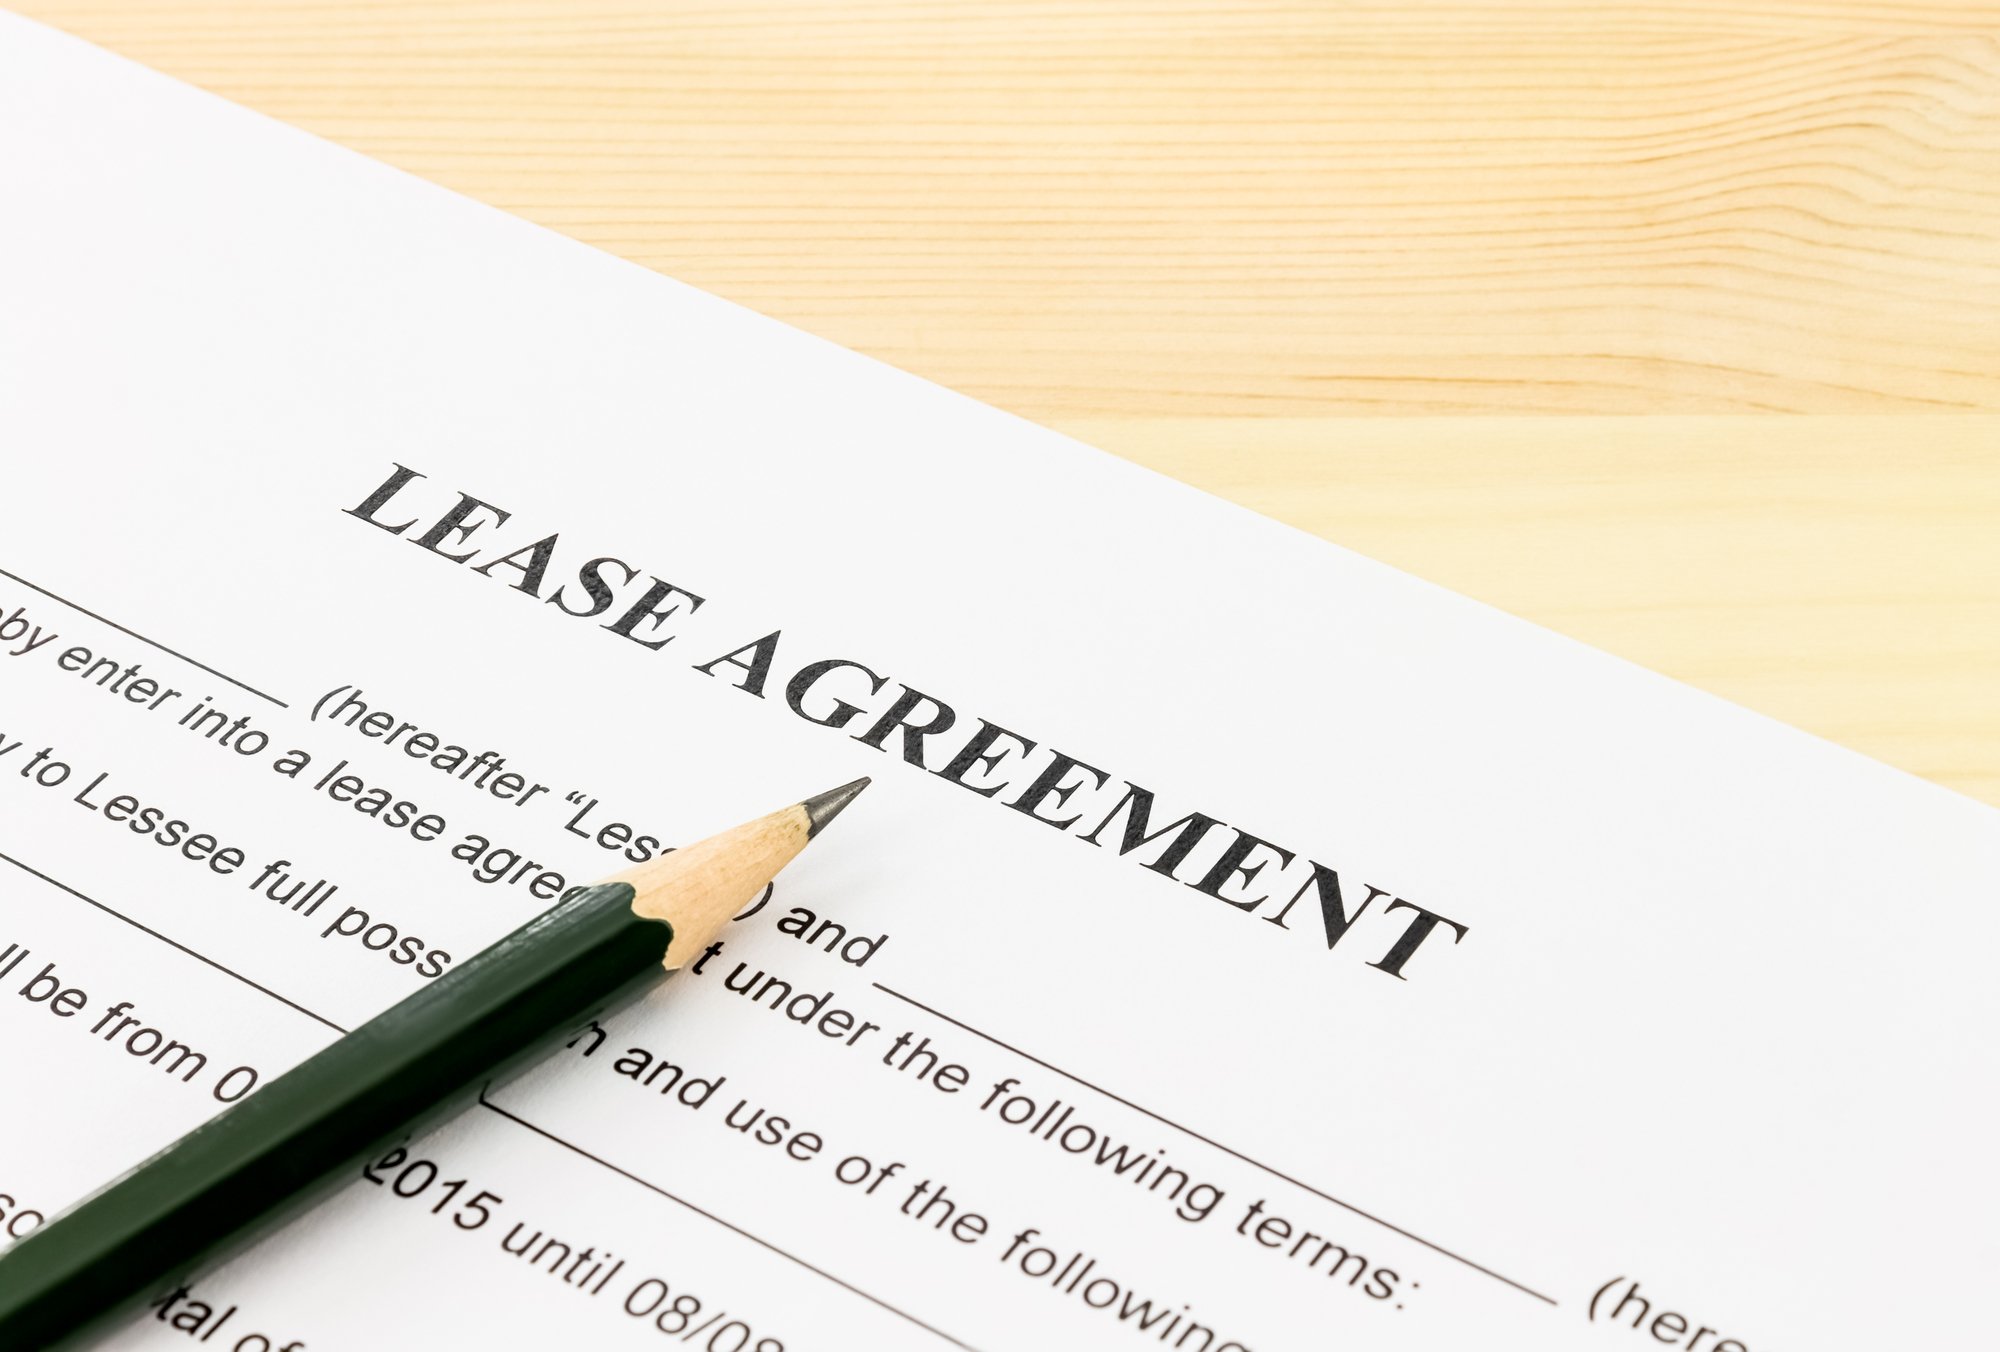 Lease Agreement Contract Document and Pencil Bottom Left Corner